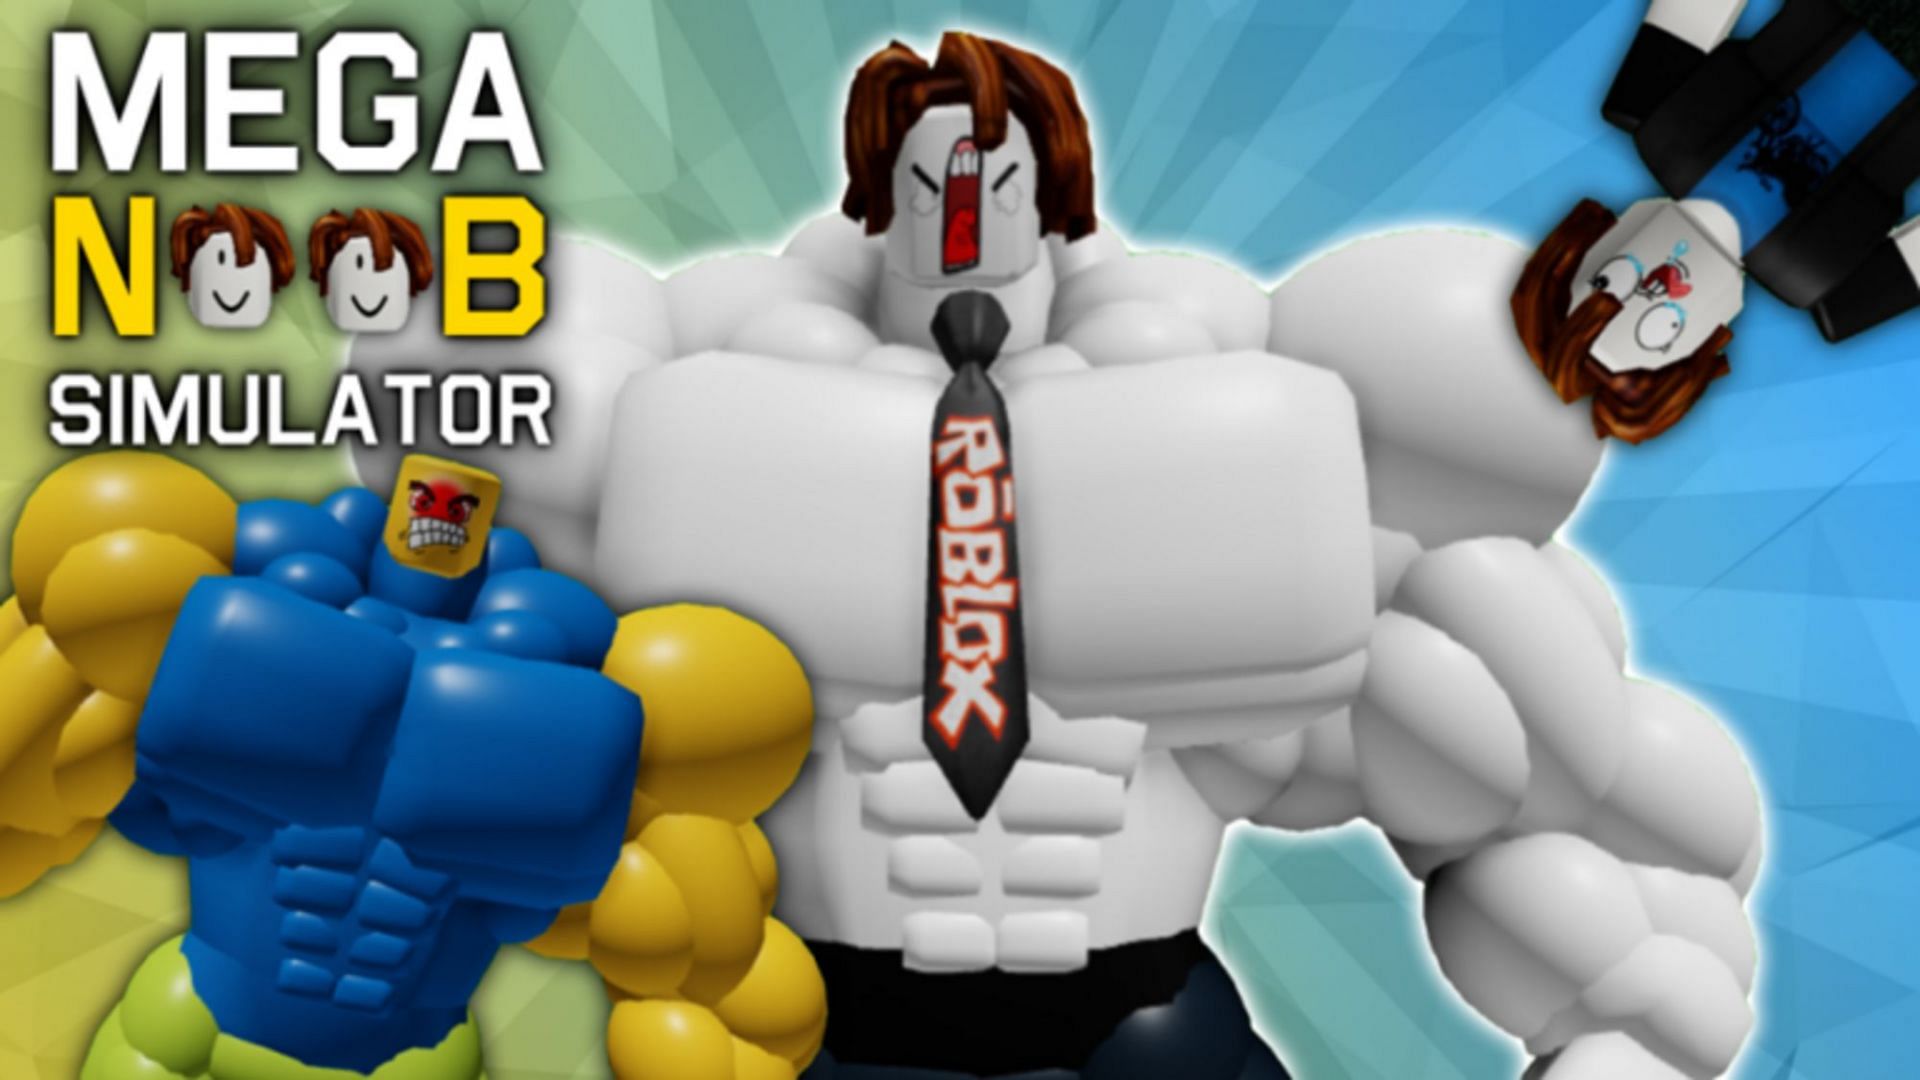 Build muscle and get stronger (Image via Roblox)